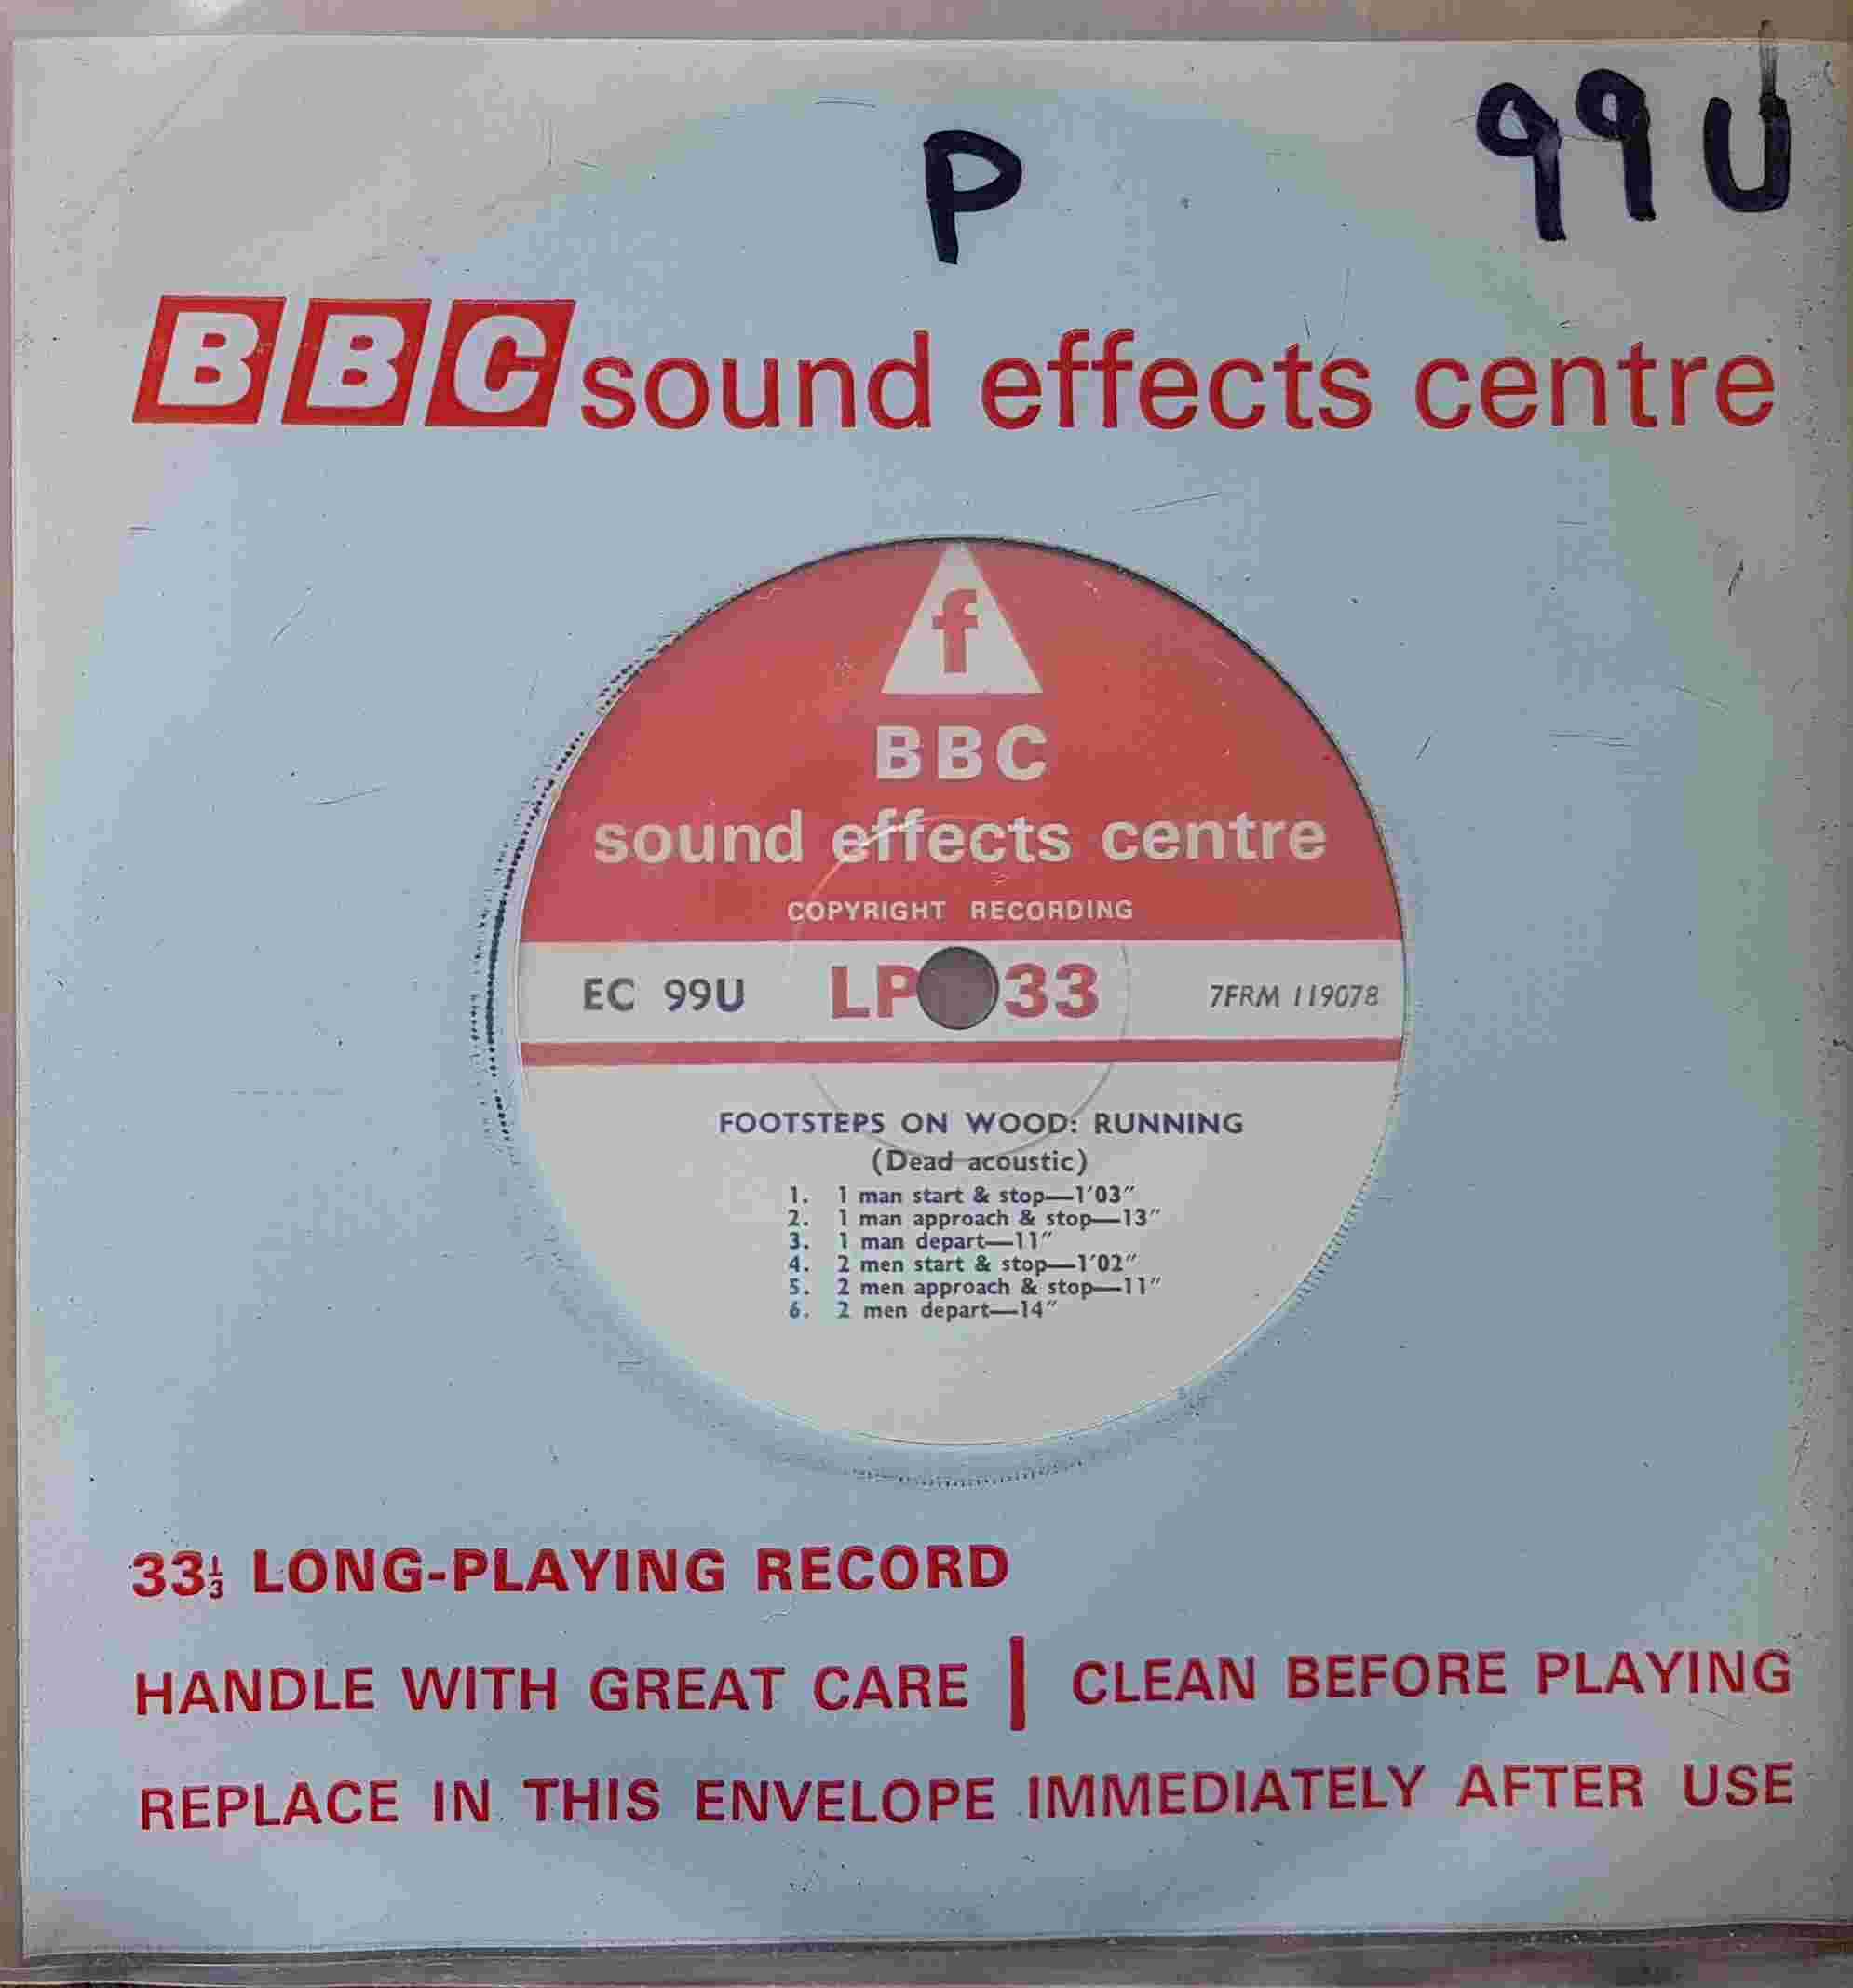 Picture of EC 99U Footsteps on wood: Running (Dead accoustic) by artist Not registered from the BBC singles - Records and Tapes library